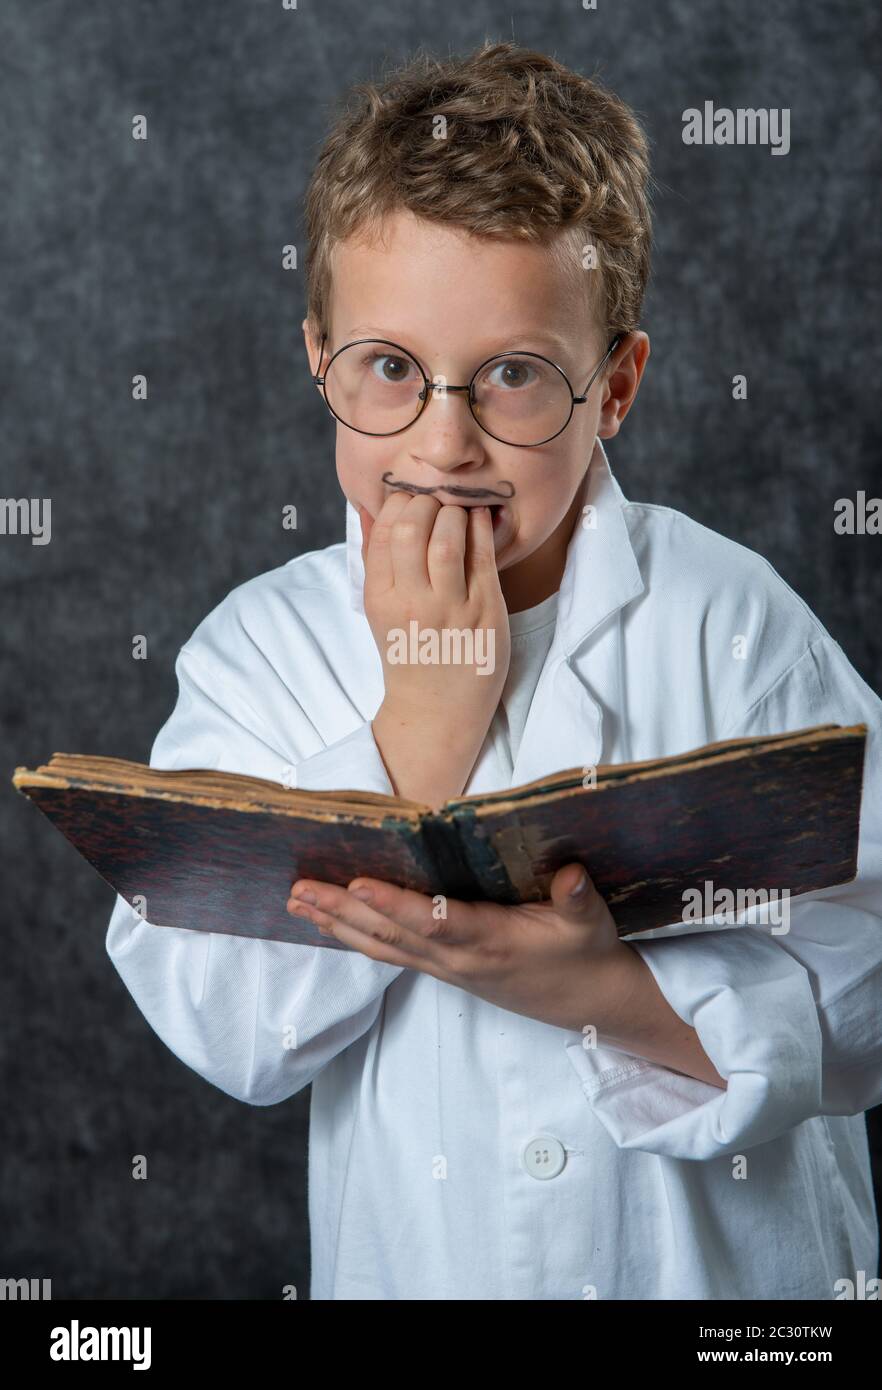 cheerful boy retro with a white blouse reading a book Stock Photo